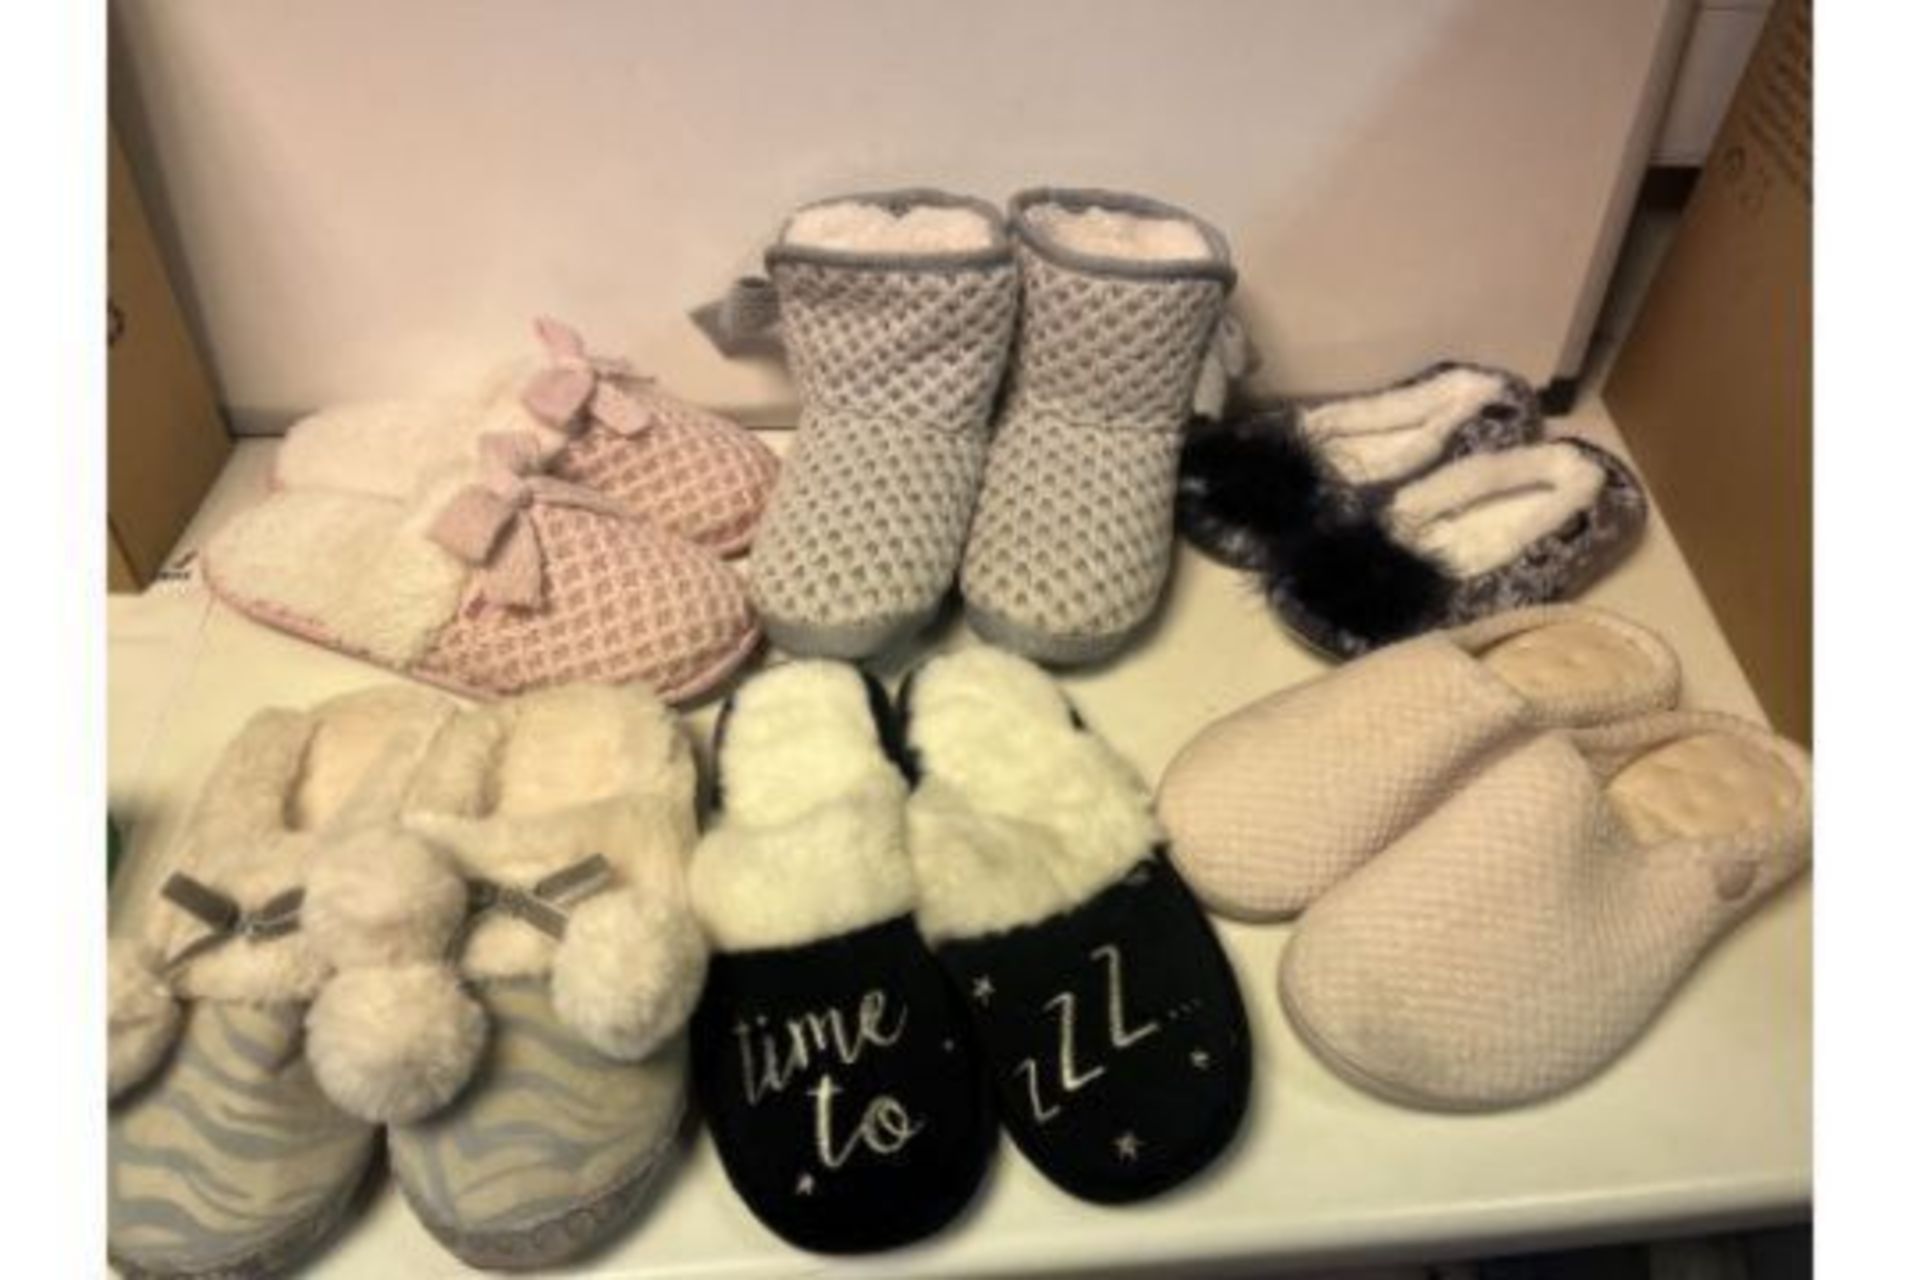 20 X BRAND NEW TOTES LADIES ASSORTED SLIPPERS IN VARIOUS STYLES AND SIZES R18